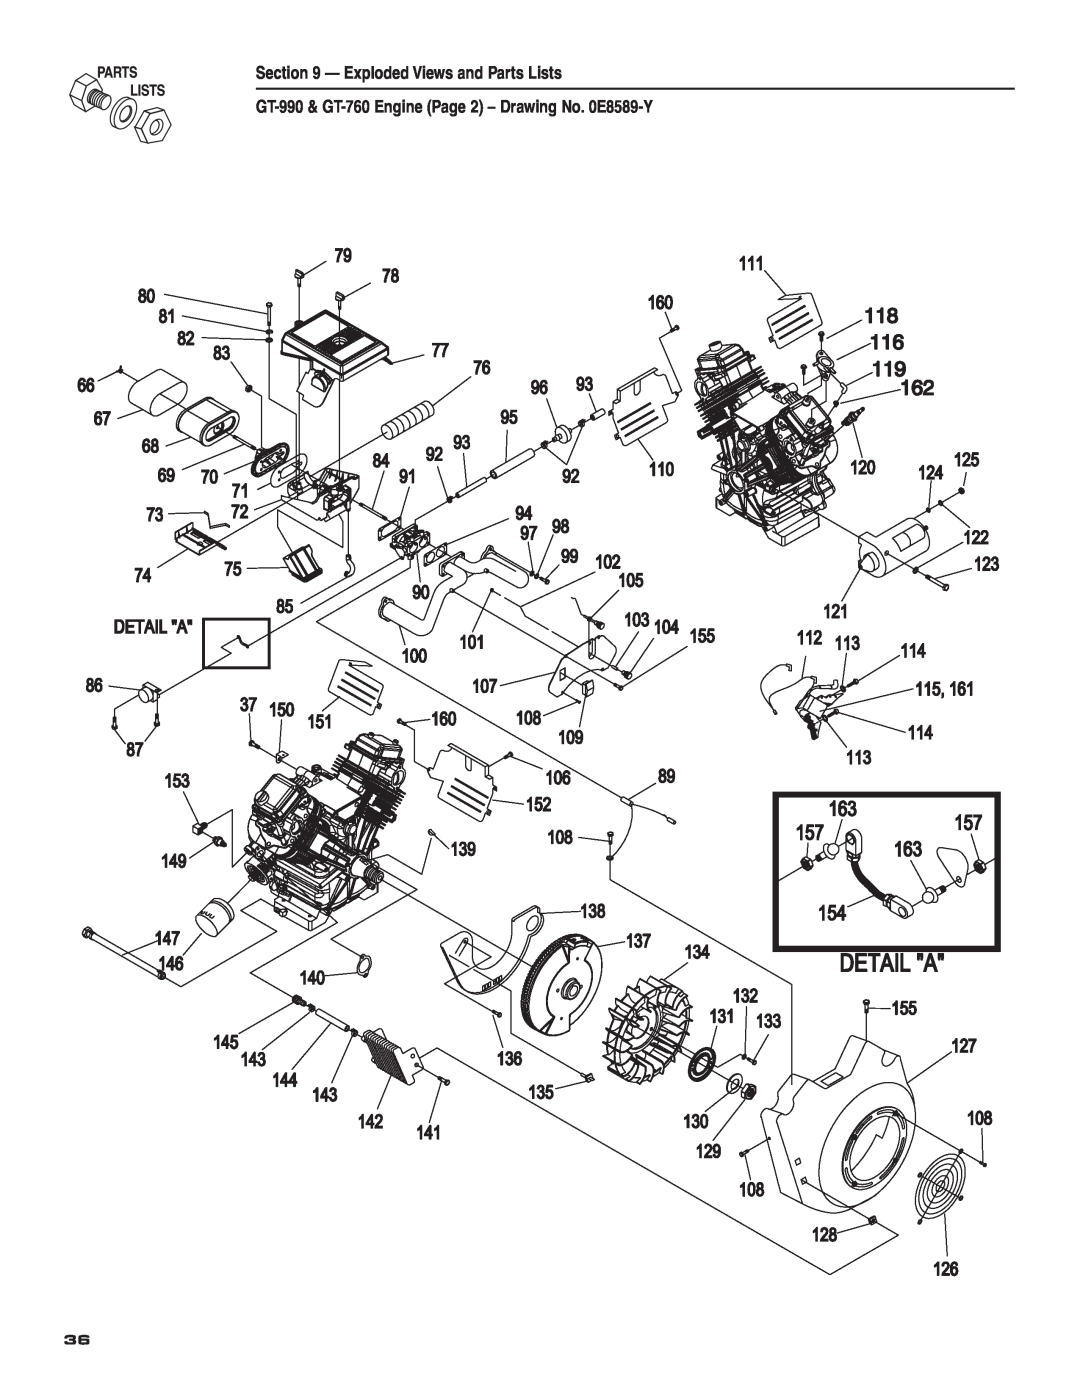 Guardian Technologies 004583-0 Exploded Views and Parts Lists, GT-990 & GT-760 Engine Page 2 - Drawing No. 0E8589-Y 